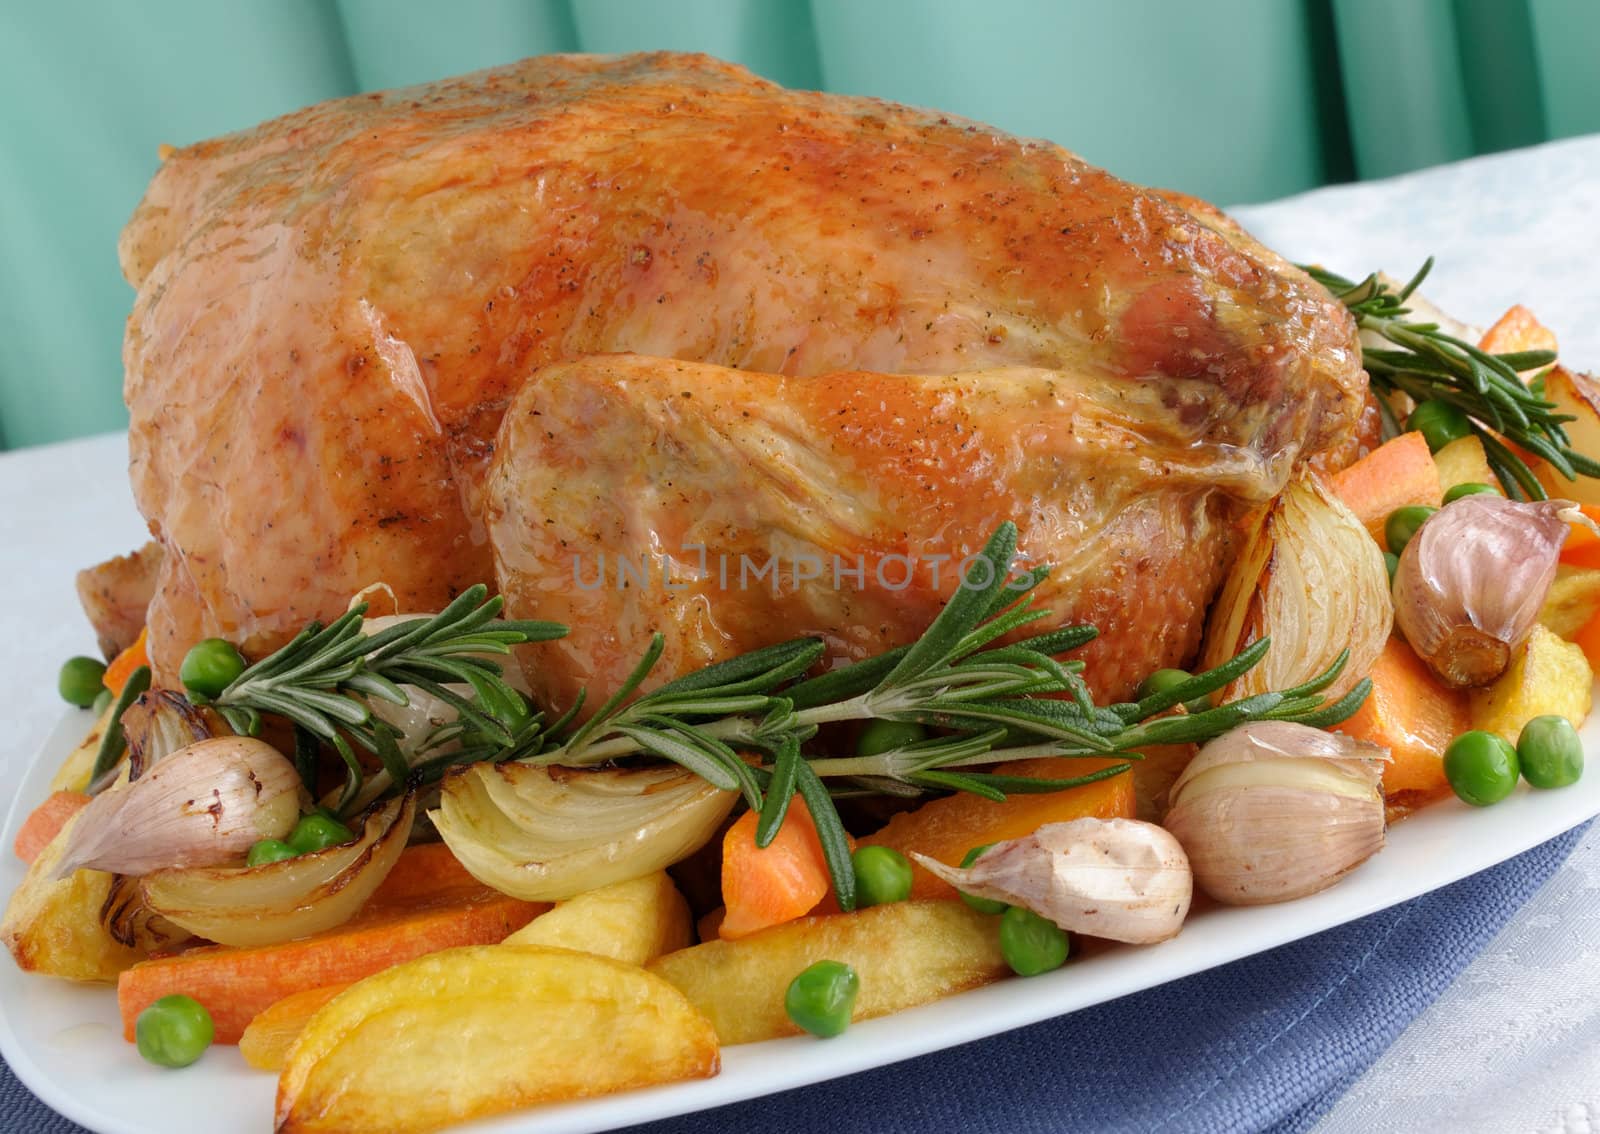 Baked chicken with vegetables and whole rosemary

